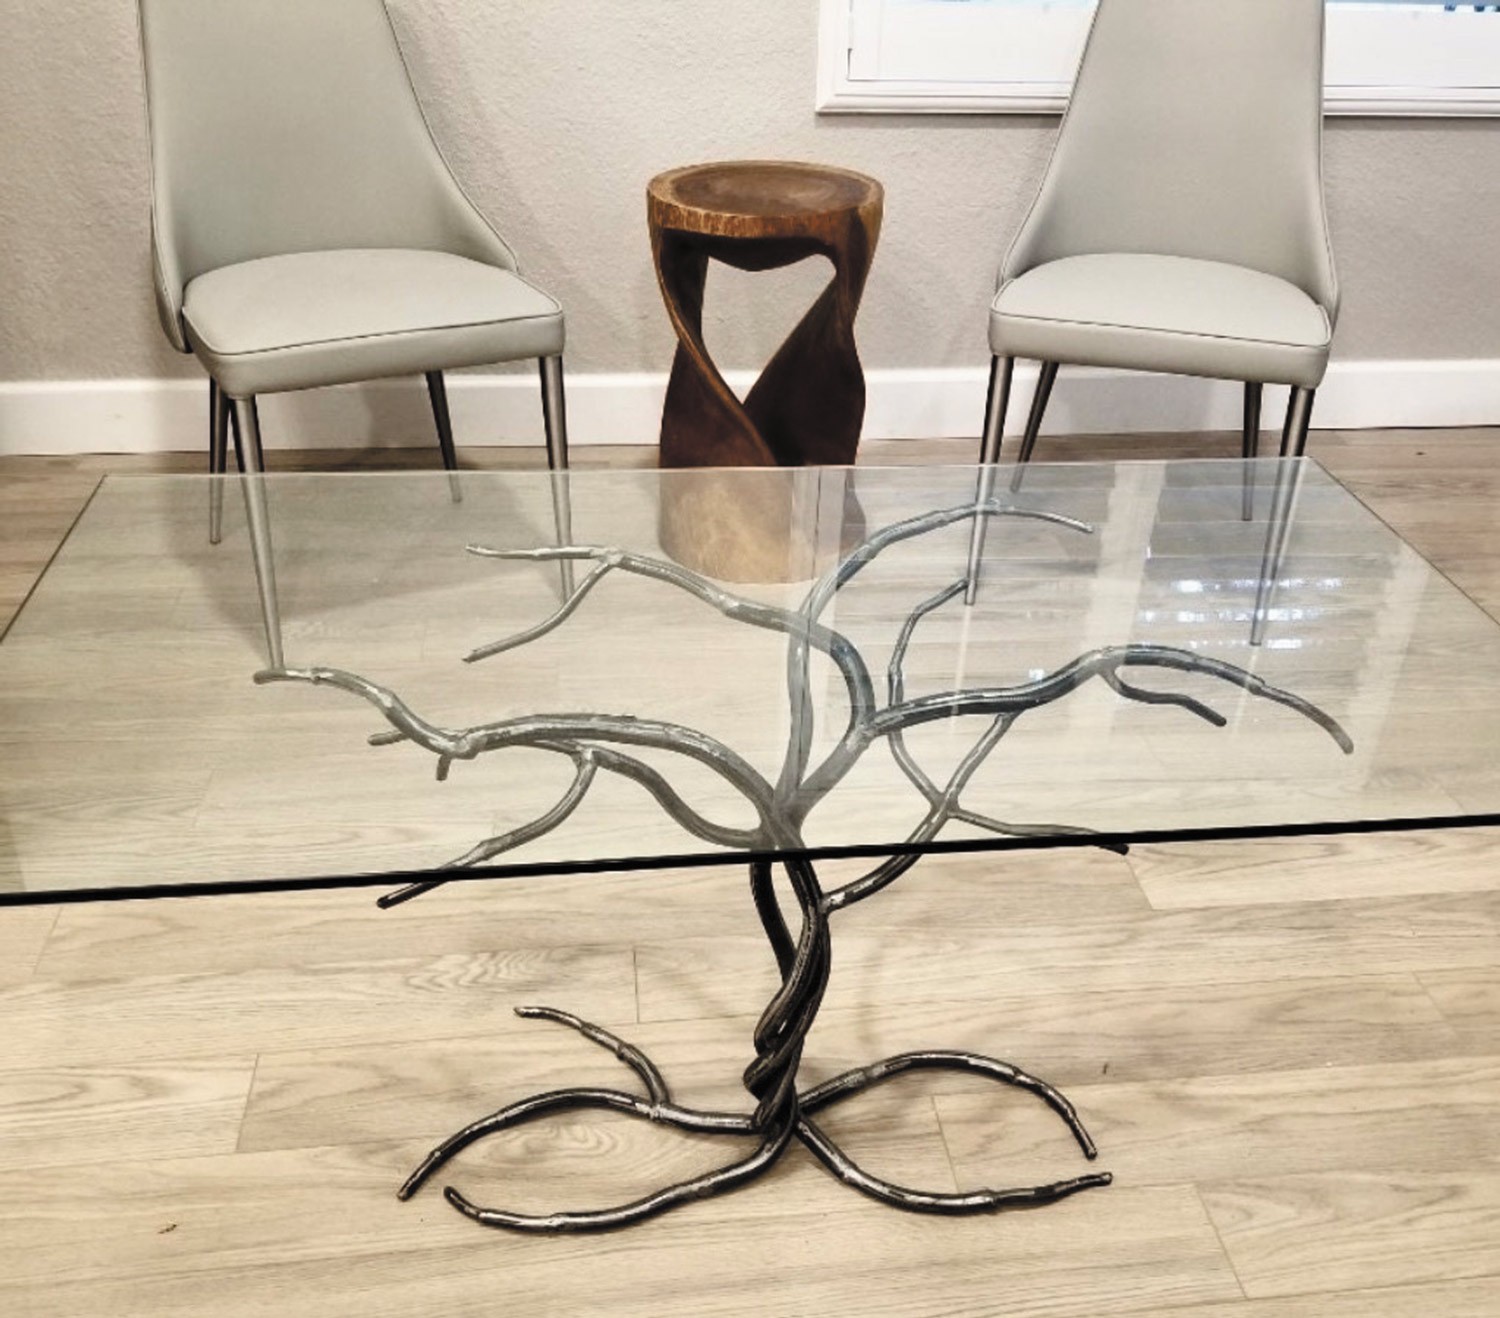 Artistic yet functional custom metalwork can elevate a home improvement project